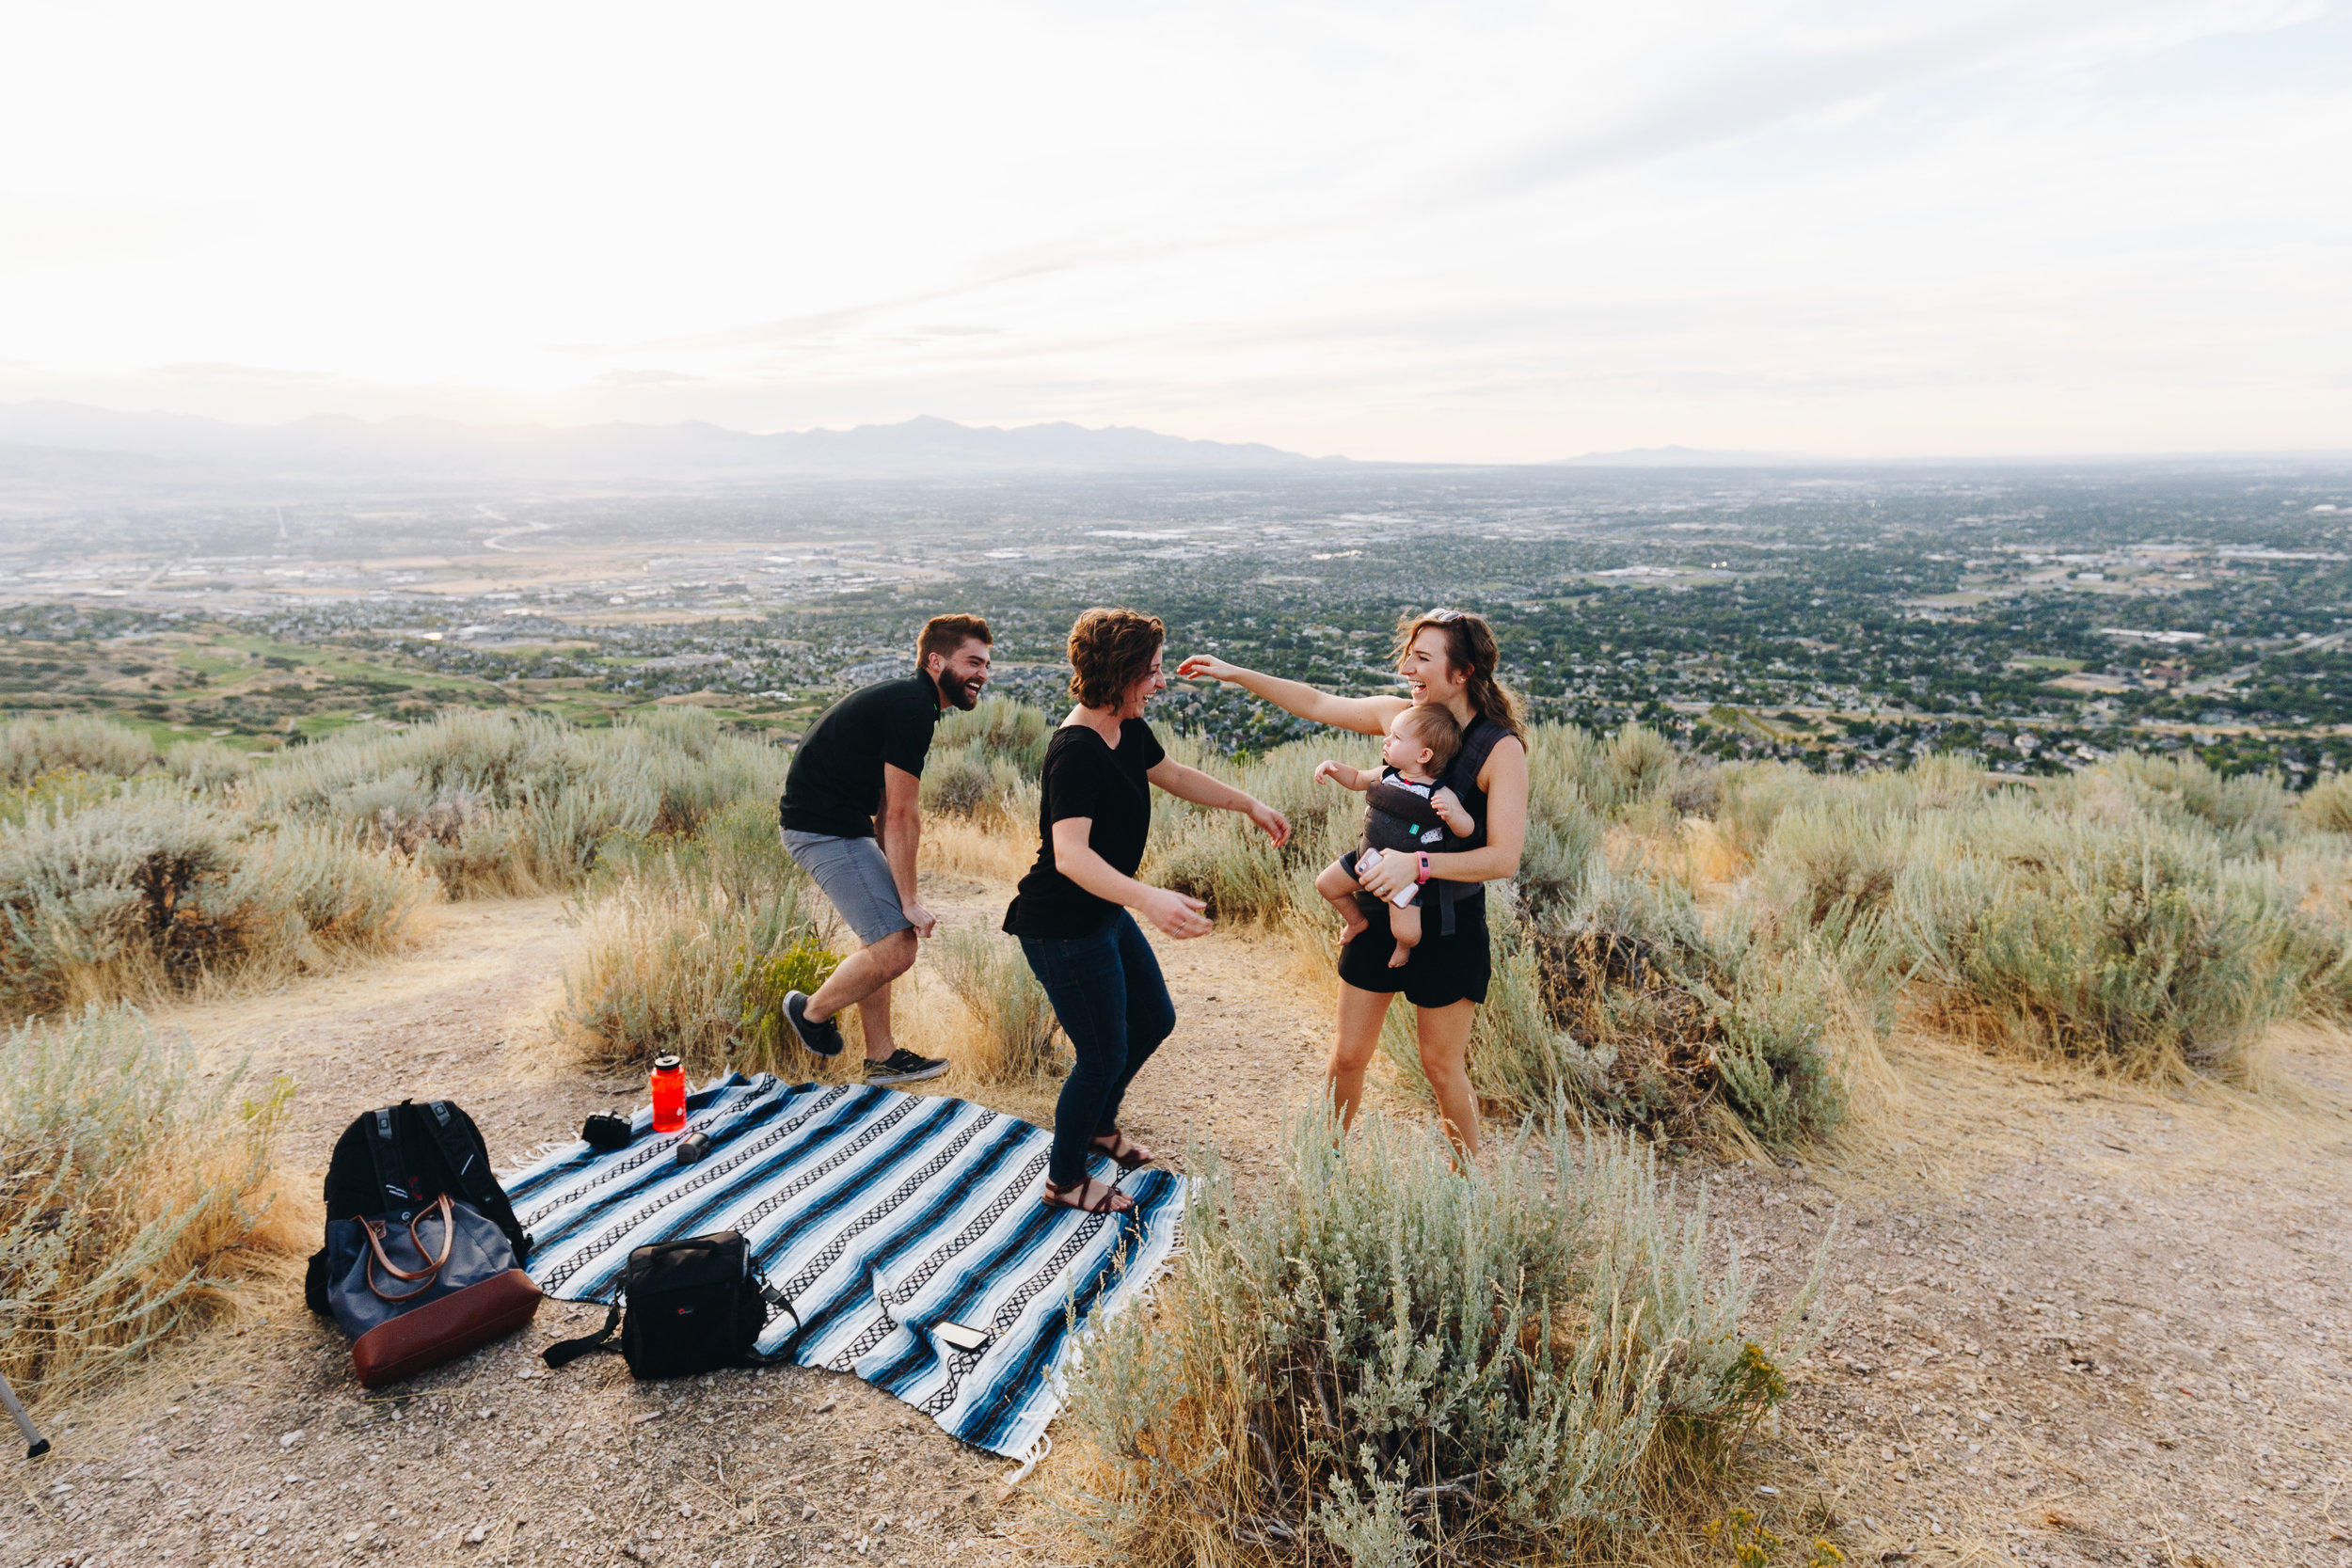 Utah Proposal and Engagement With a View // Andrew+Bethany